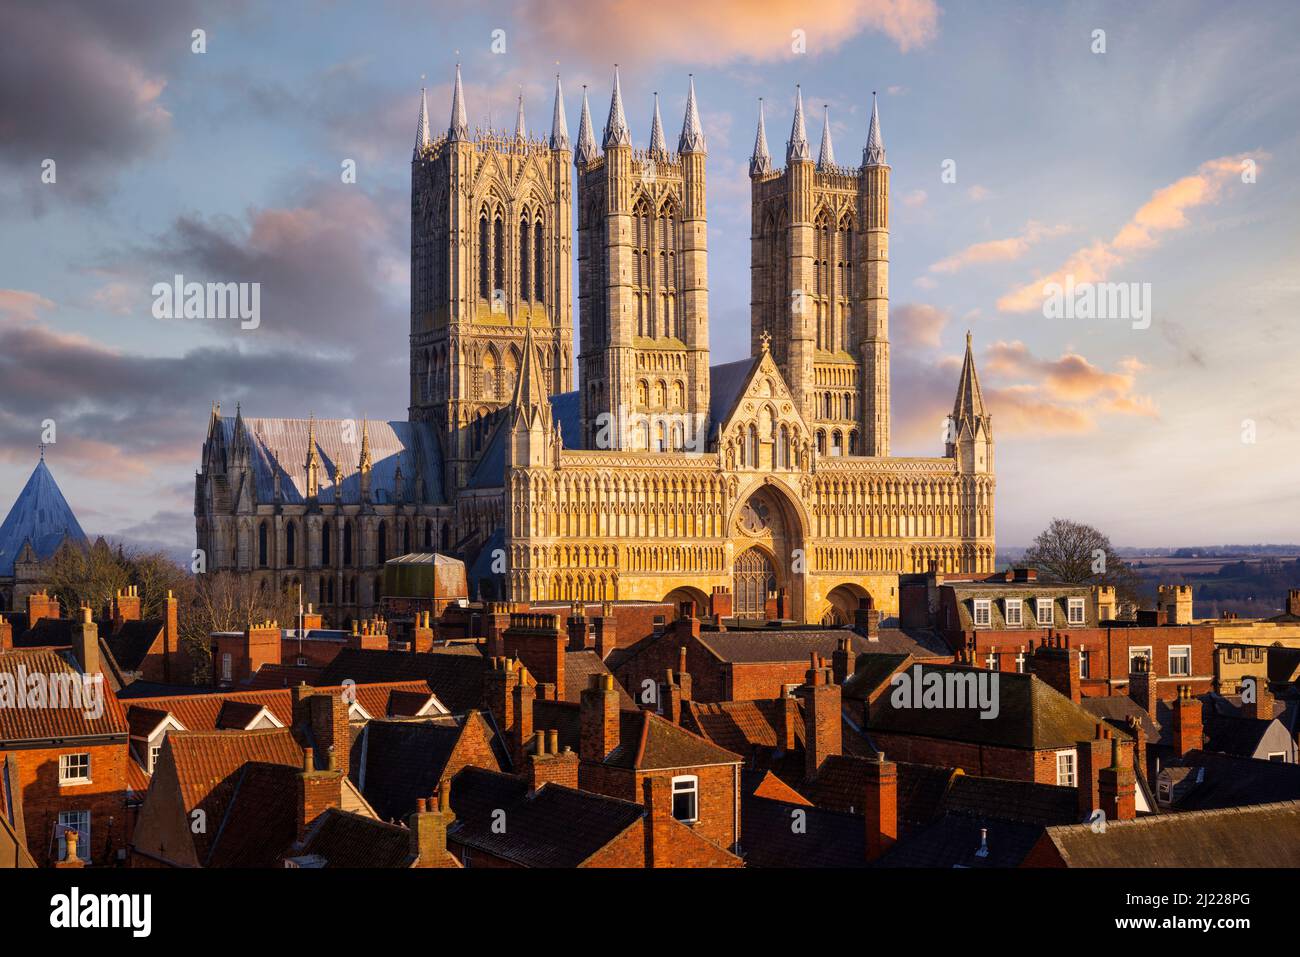 Lincoln Cathedral or Lincoln Minster behind the rooftops of the City of Lincoln Lincolnshire England UK GB Europe Stock Photo